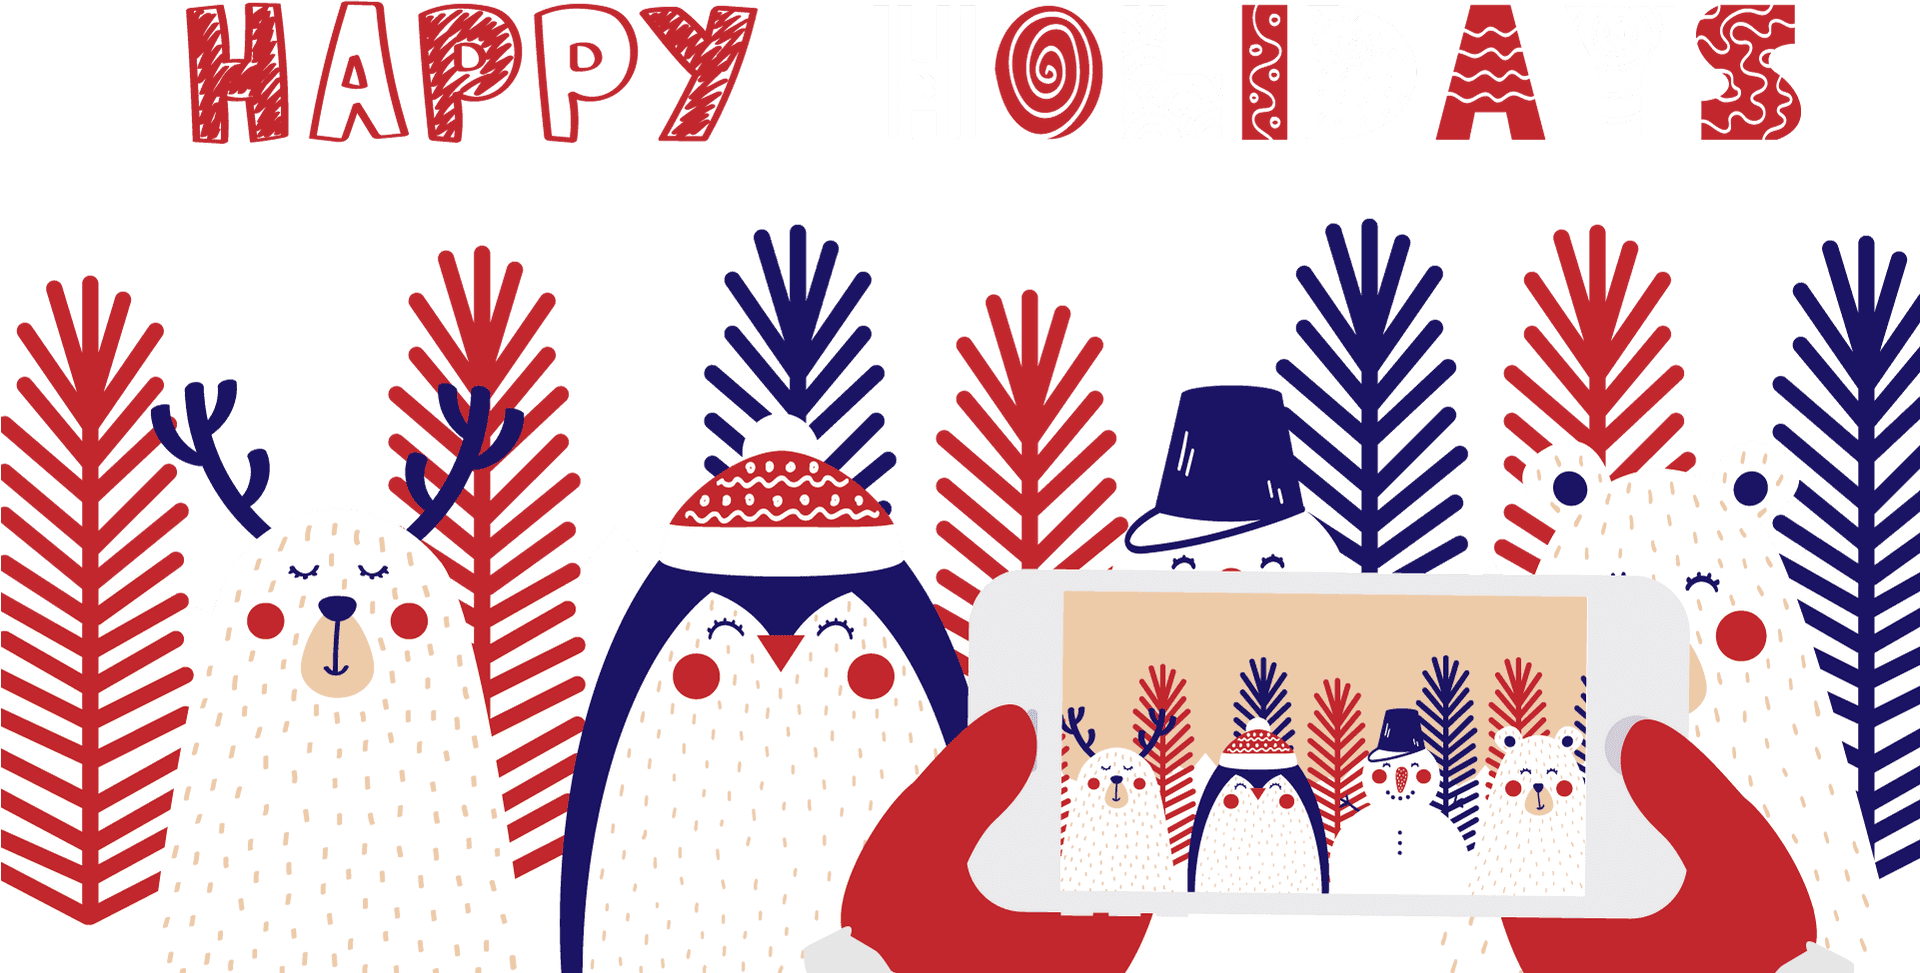 Festive Animals Selfie Holiday Greeting PNG